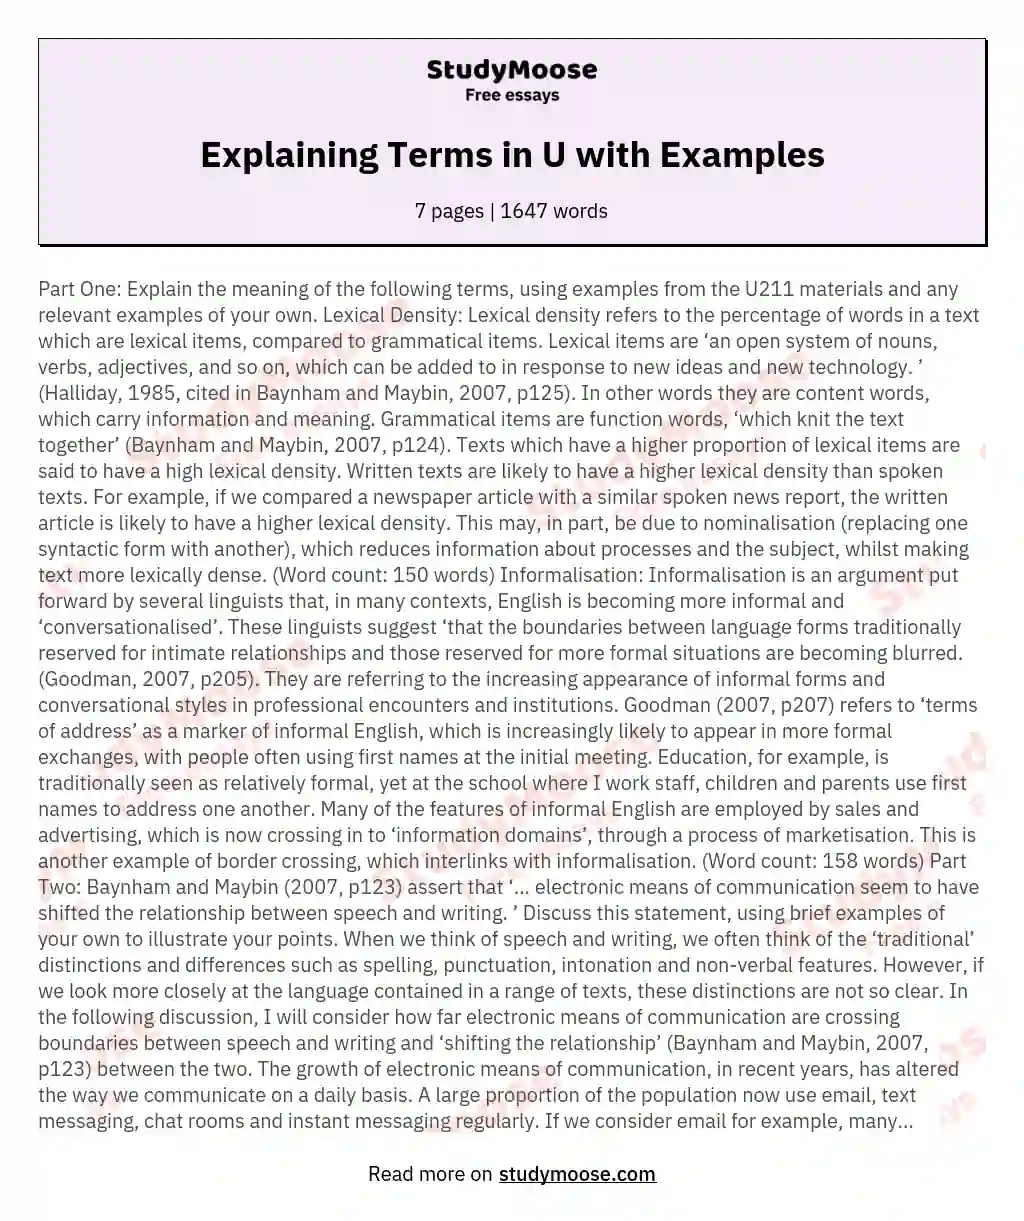 Explain the meaning of the following terms, using examples from the U211 materials and any relevant examples of your own